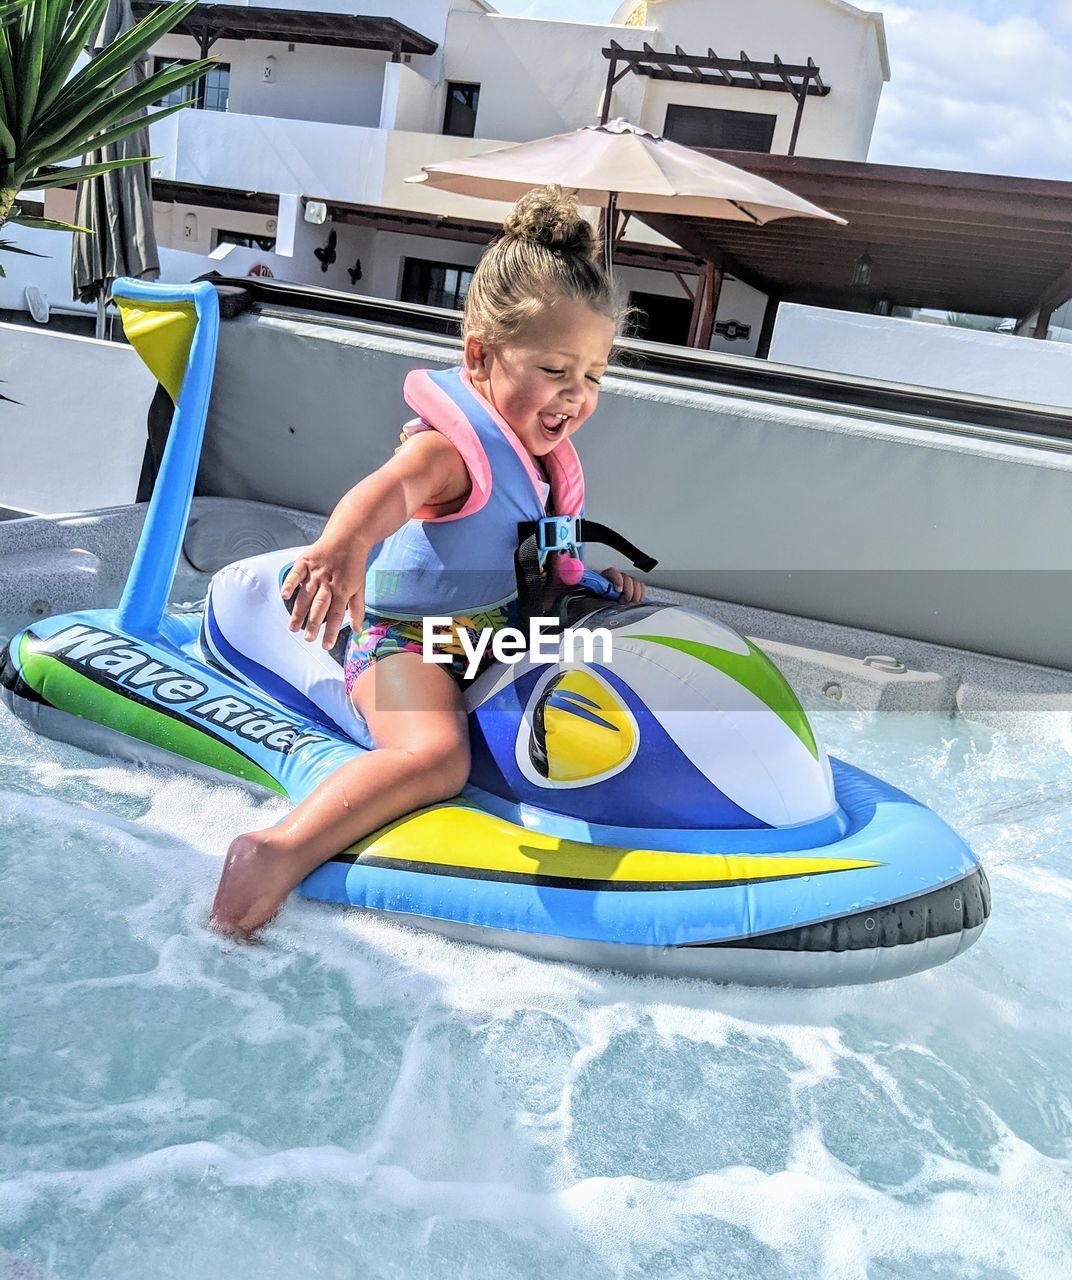 Toddler in jacuzzi on inflatable jet ski. 